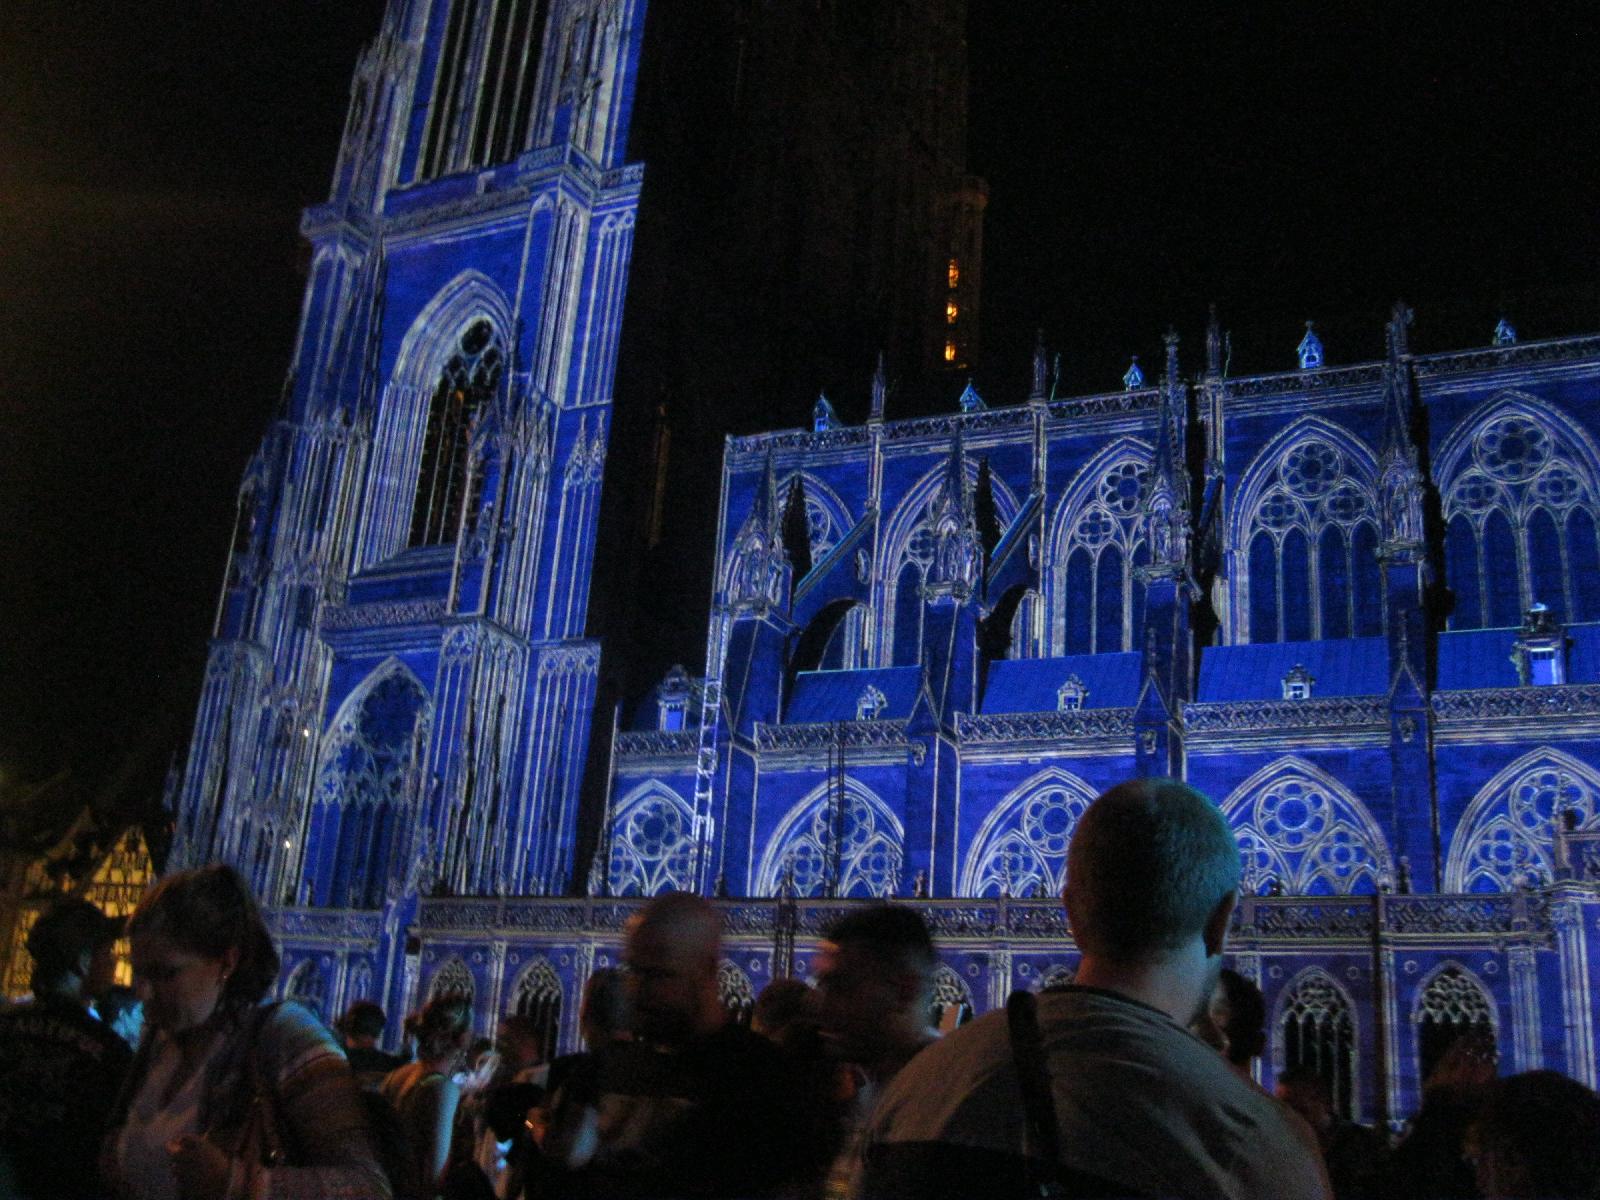 Cathedral in one of its many renditions during the light show